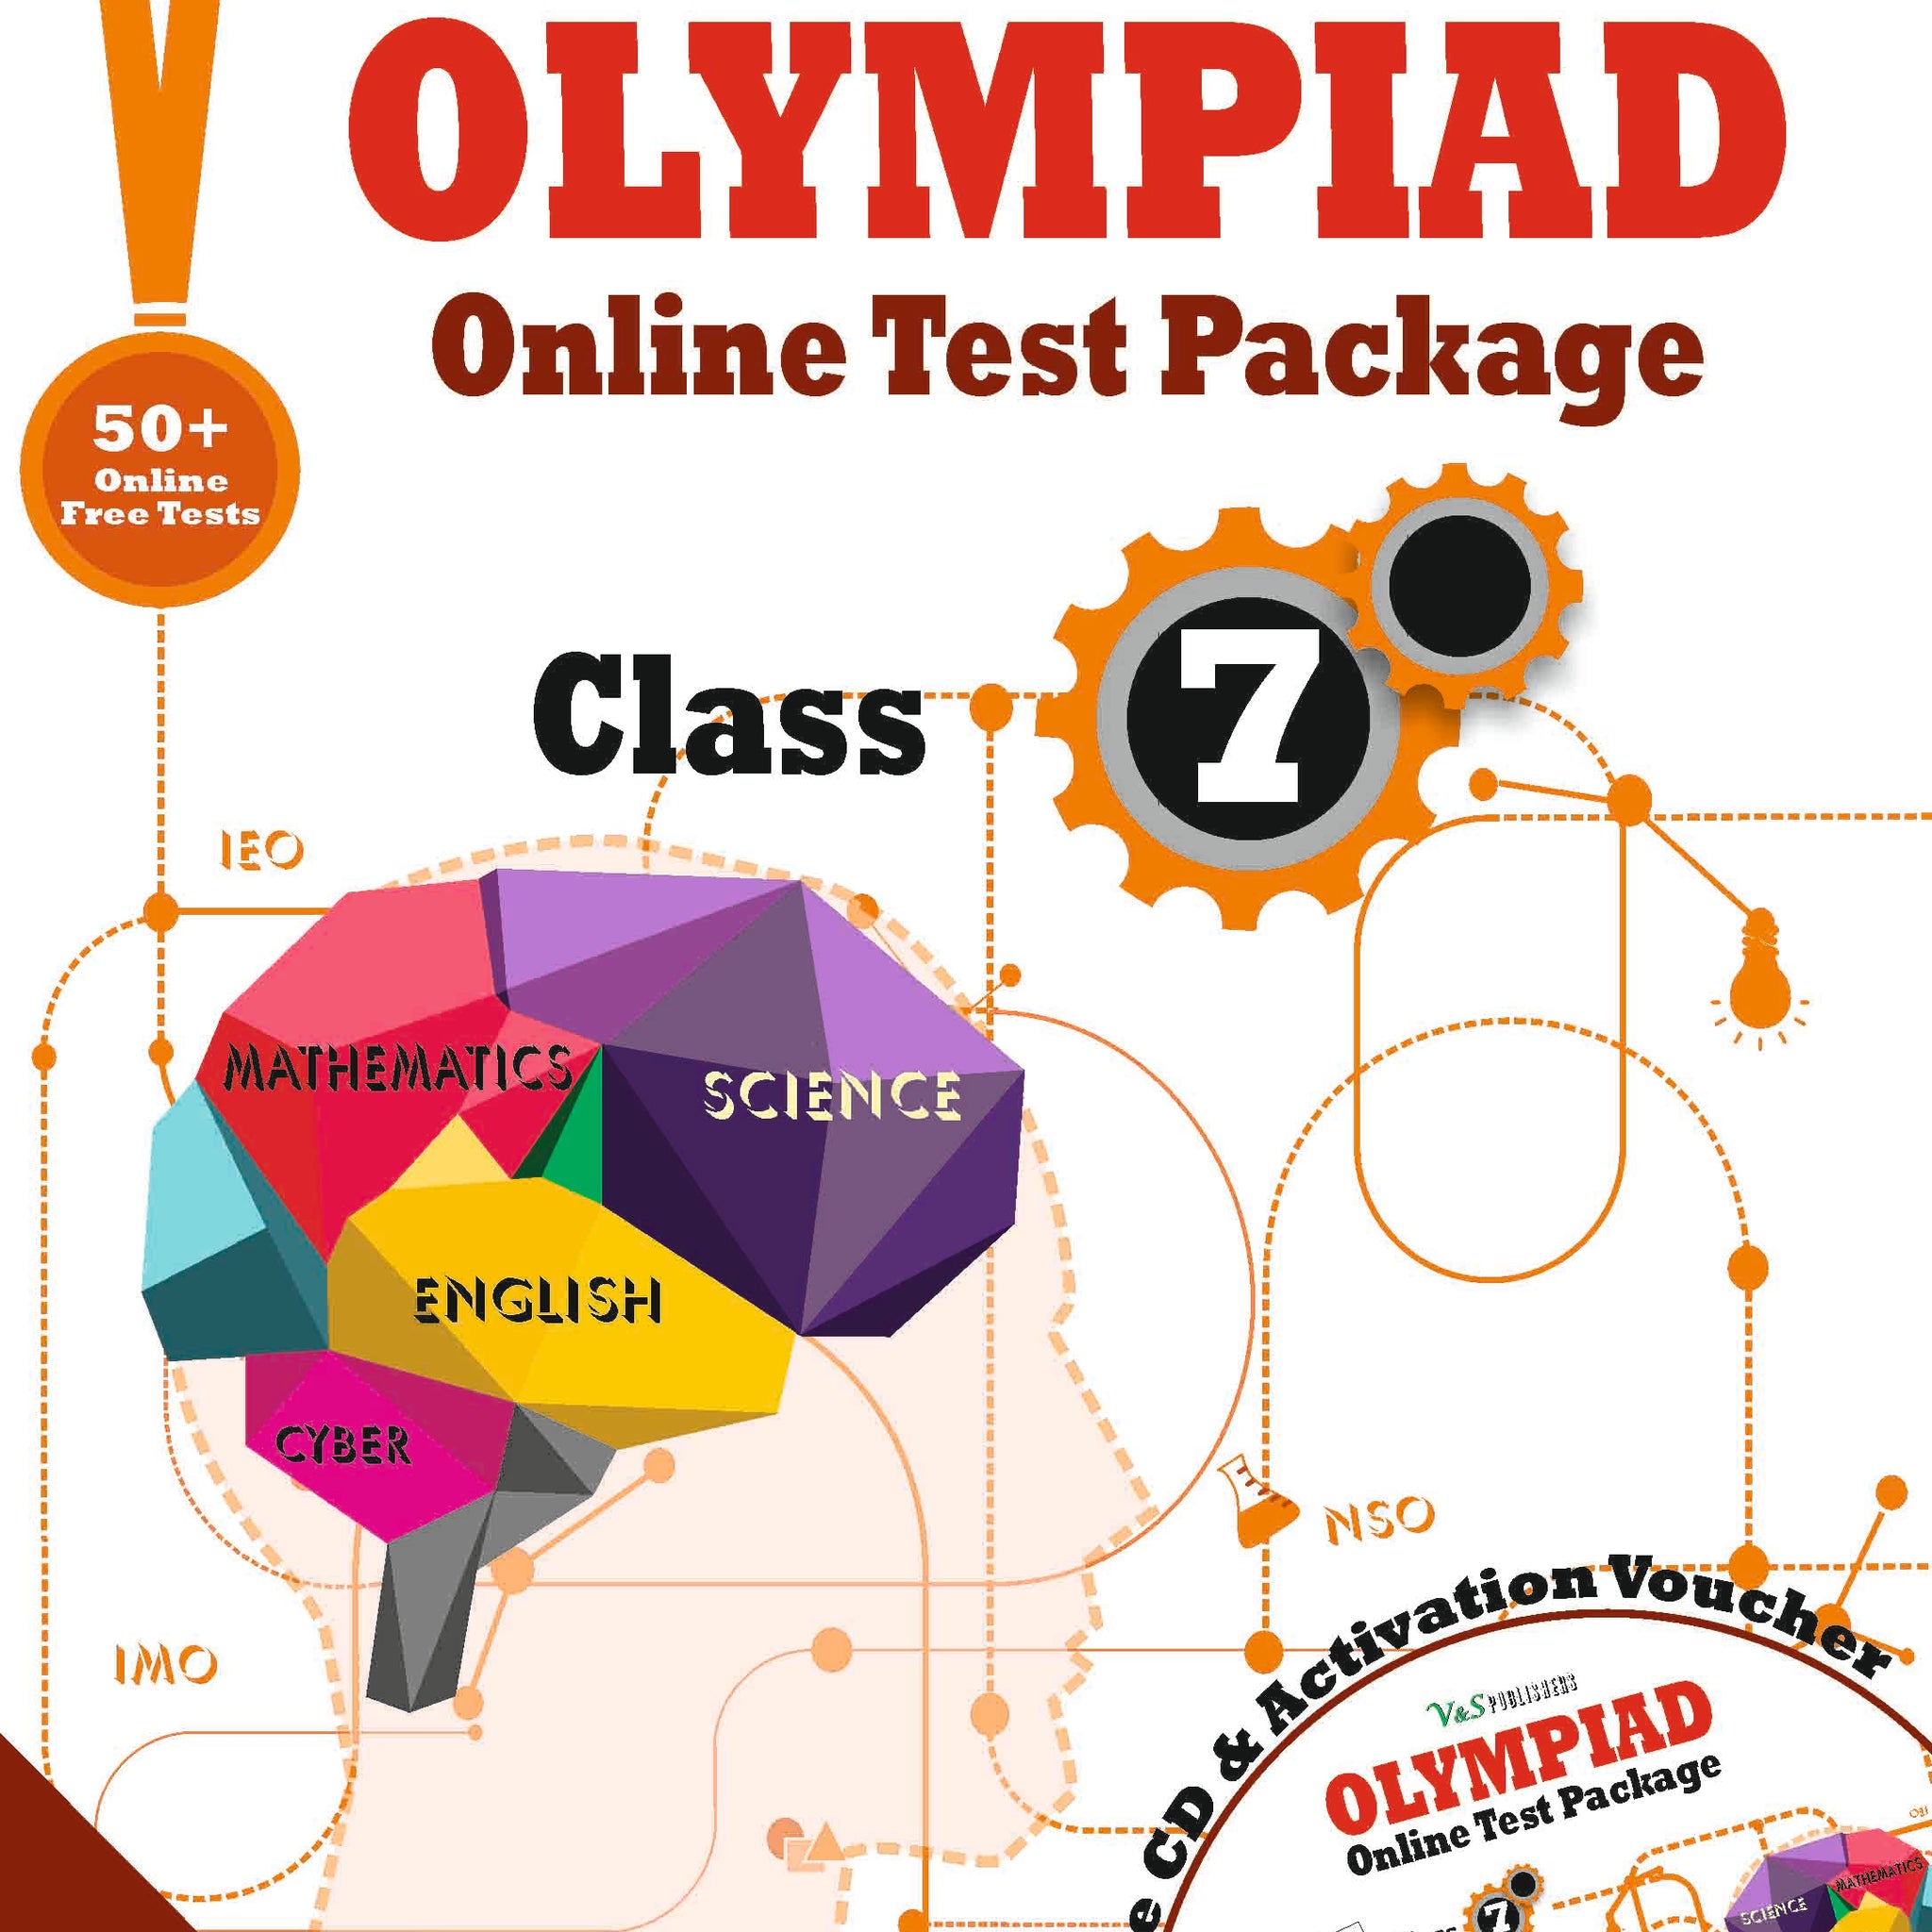 Olympiad Online Test Package Class 7 (Free CD With Activation Voucher)